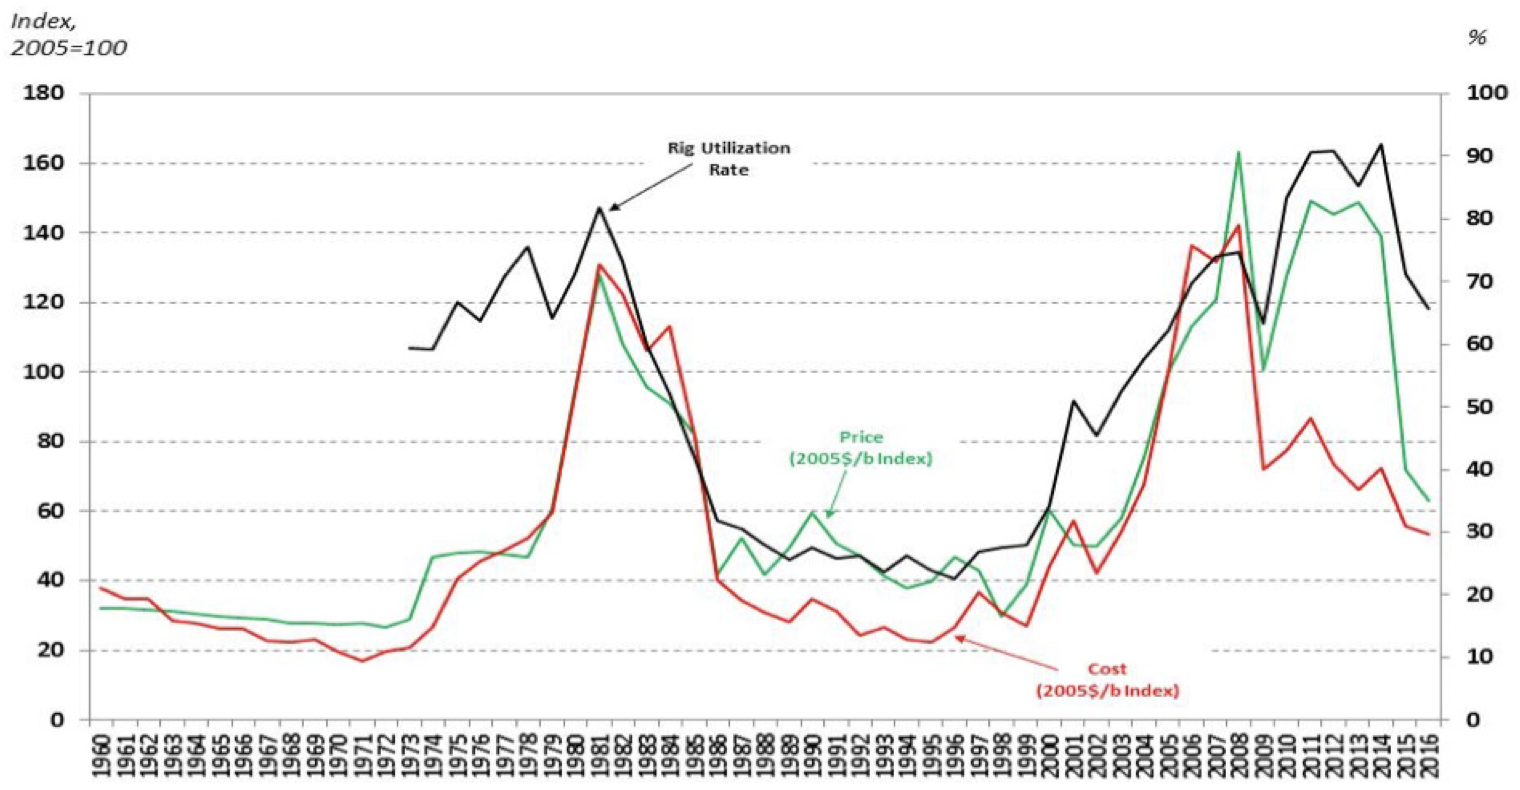 This graph compares oil prices, development costs, and rig utilization over time.